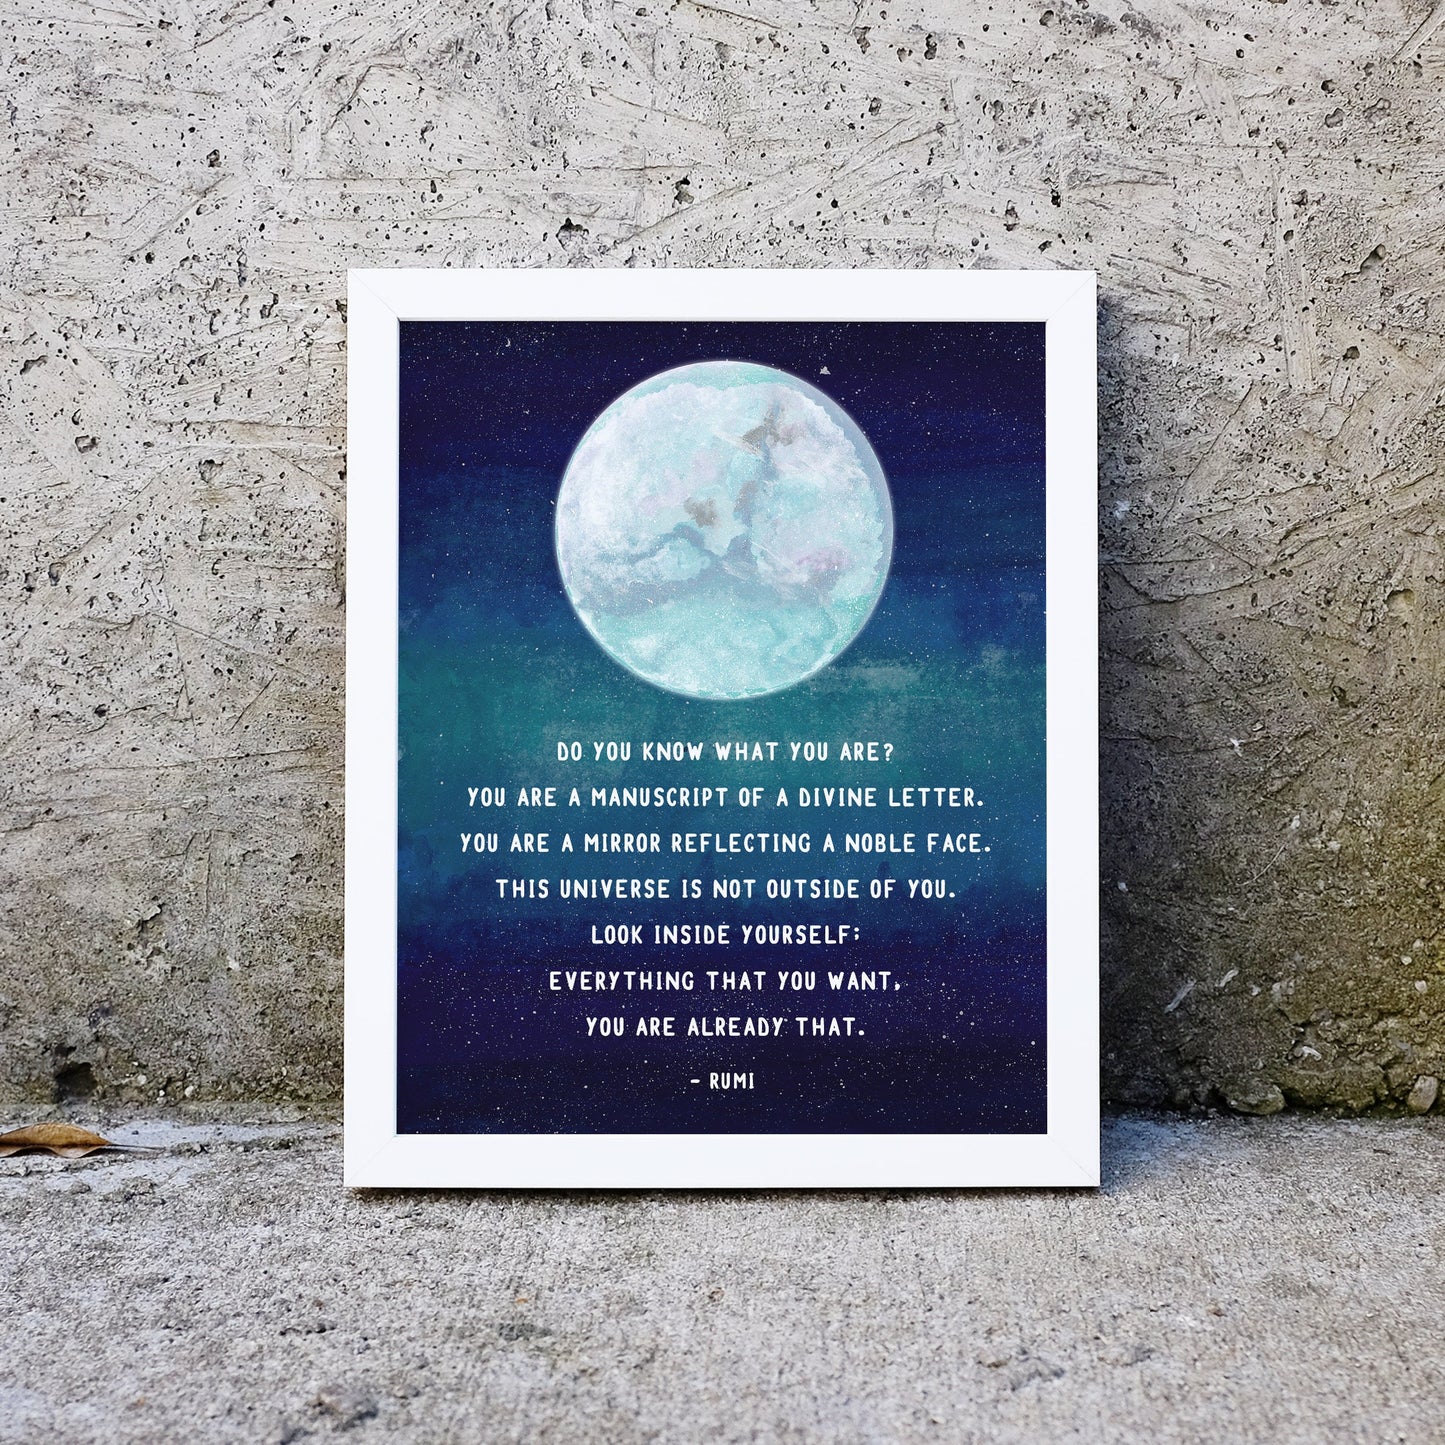 Rumi Quote Poster, do you know what you are, poetry art, Inspirational Poetry Art Print, Literary Quote Print Art, Item Code - COTC PR07